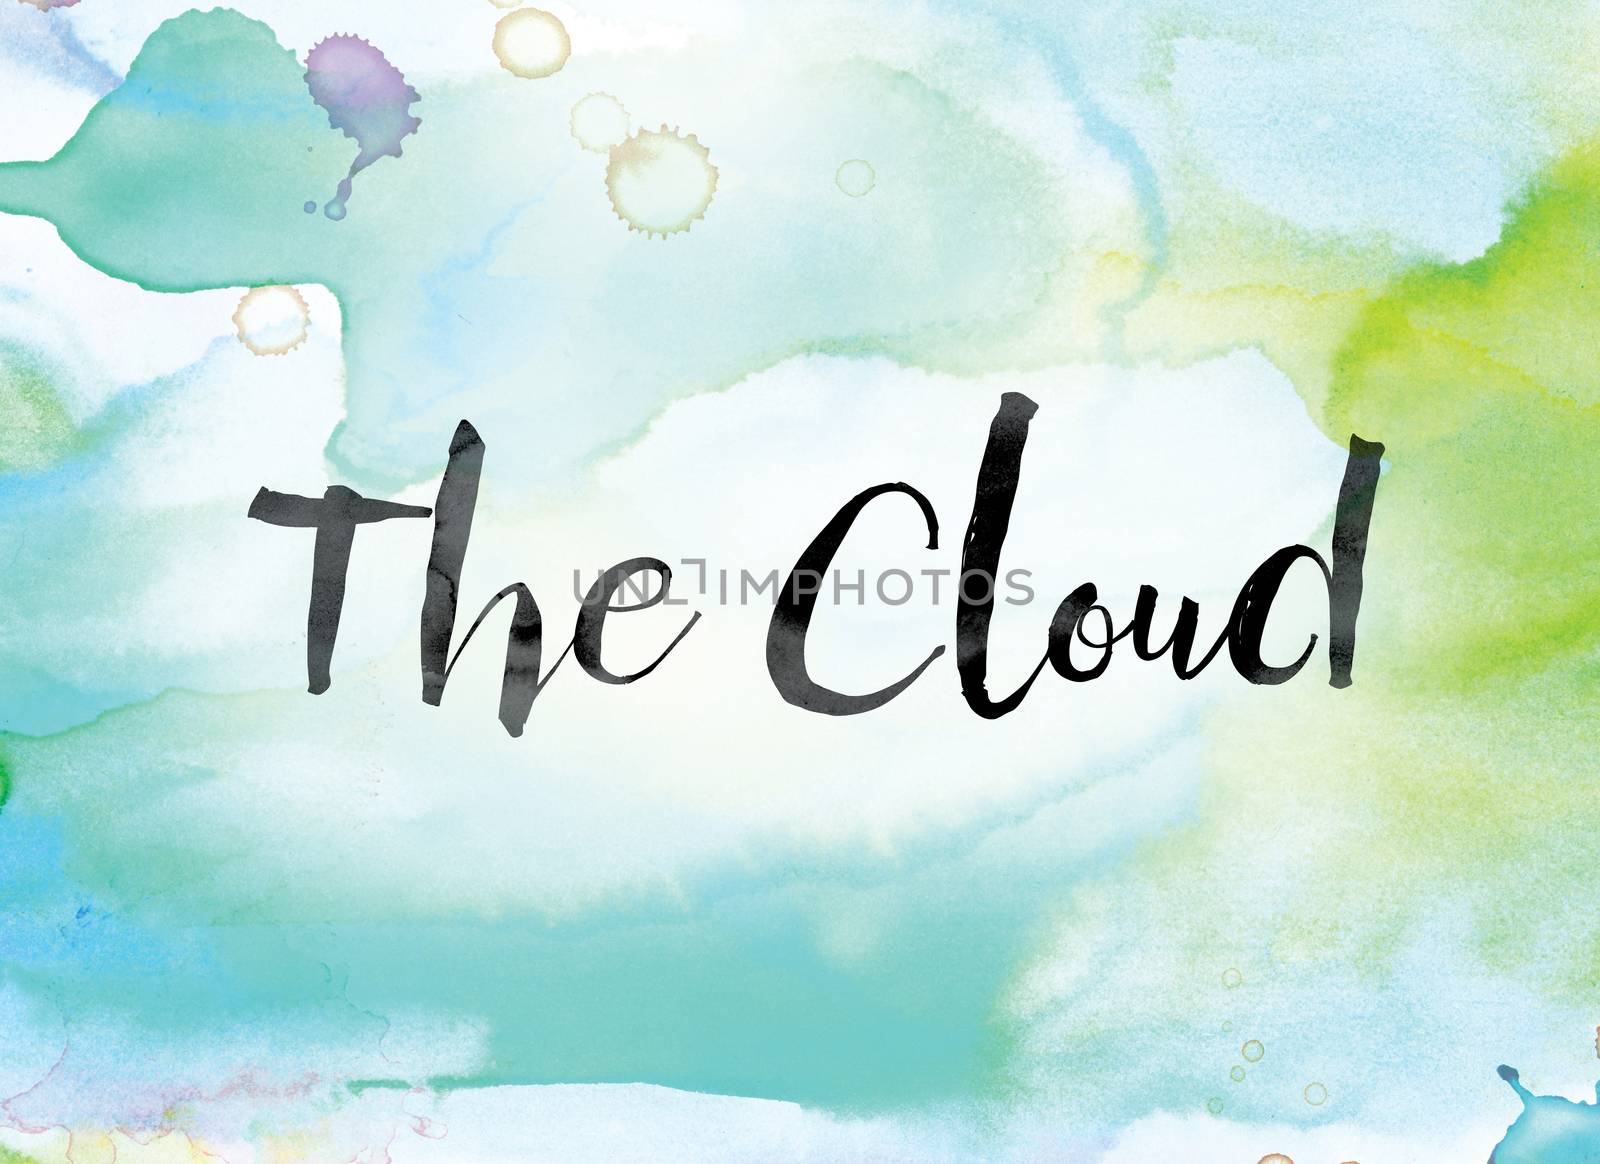 The word "The Cloud" painted in black ink over a colorful watercolor washed background concept and theme.